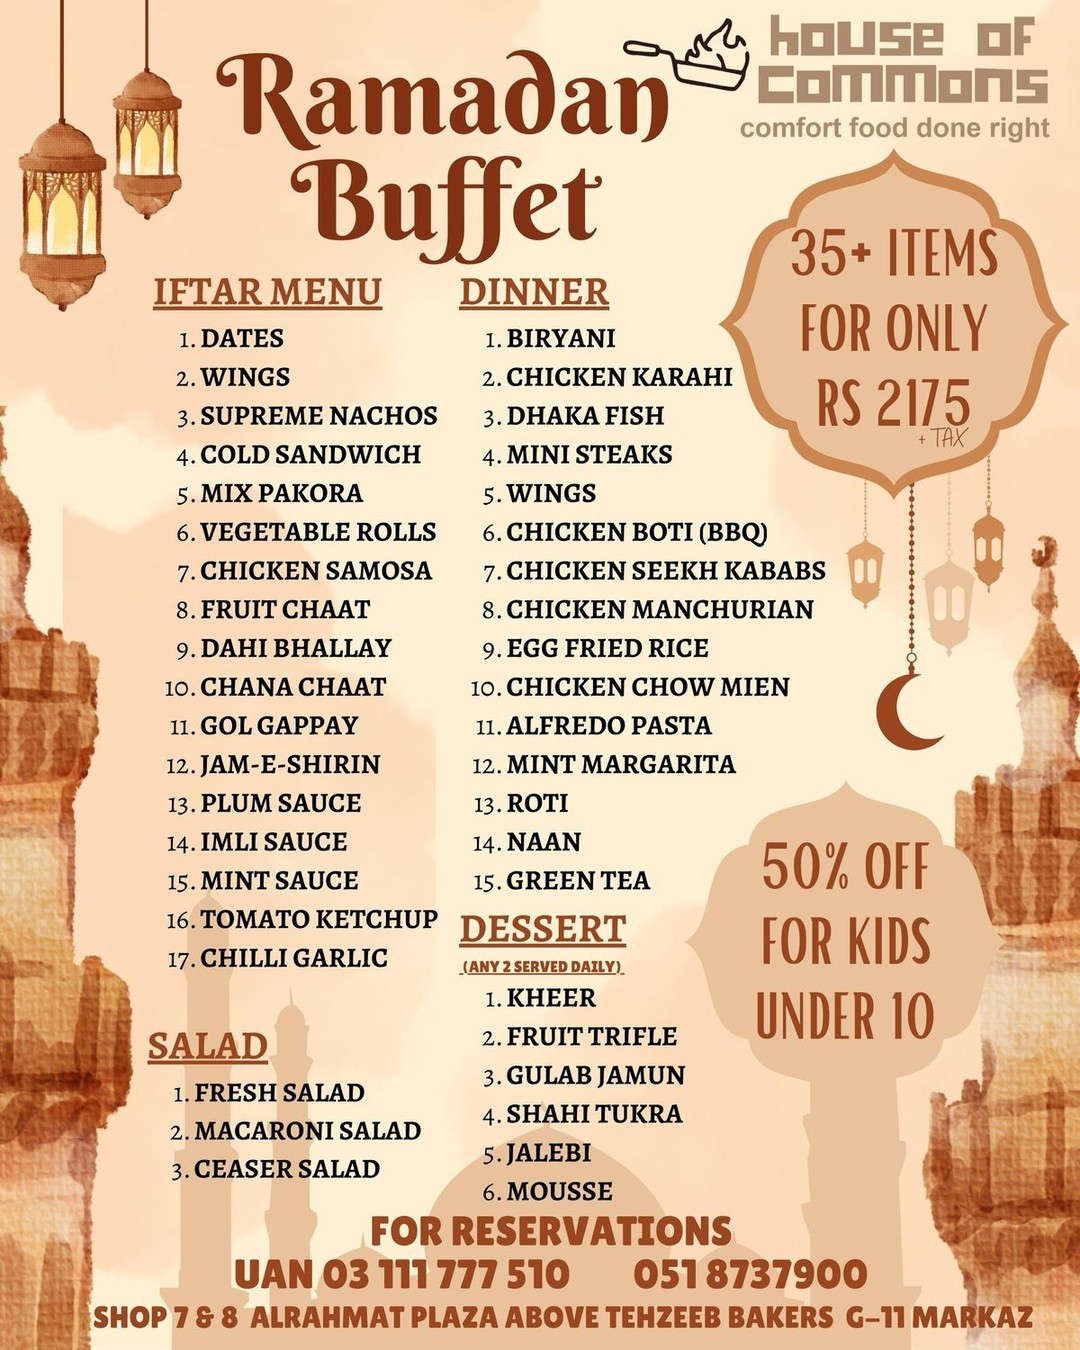 All new House of Commons Buffet Menu with 35+ items.